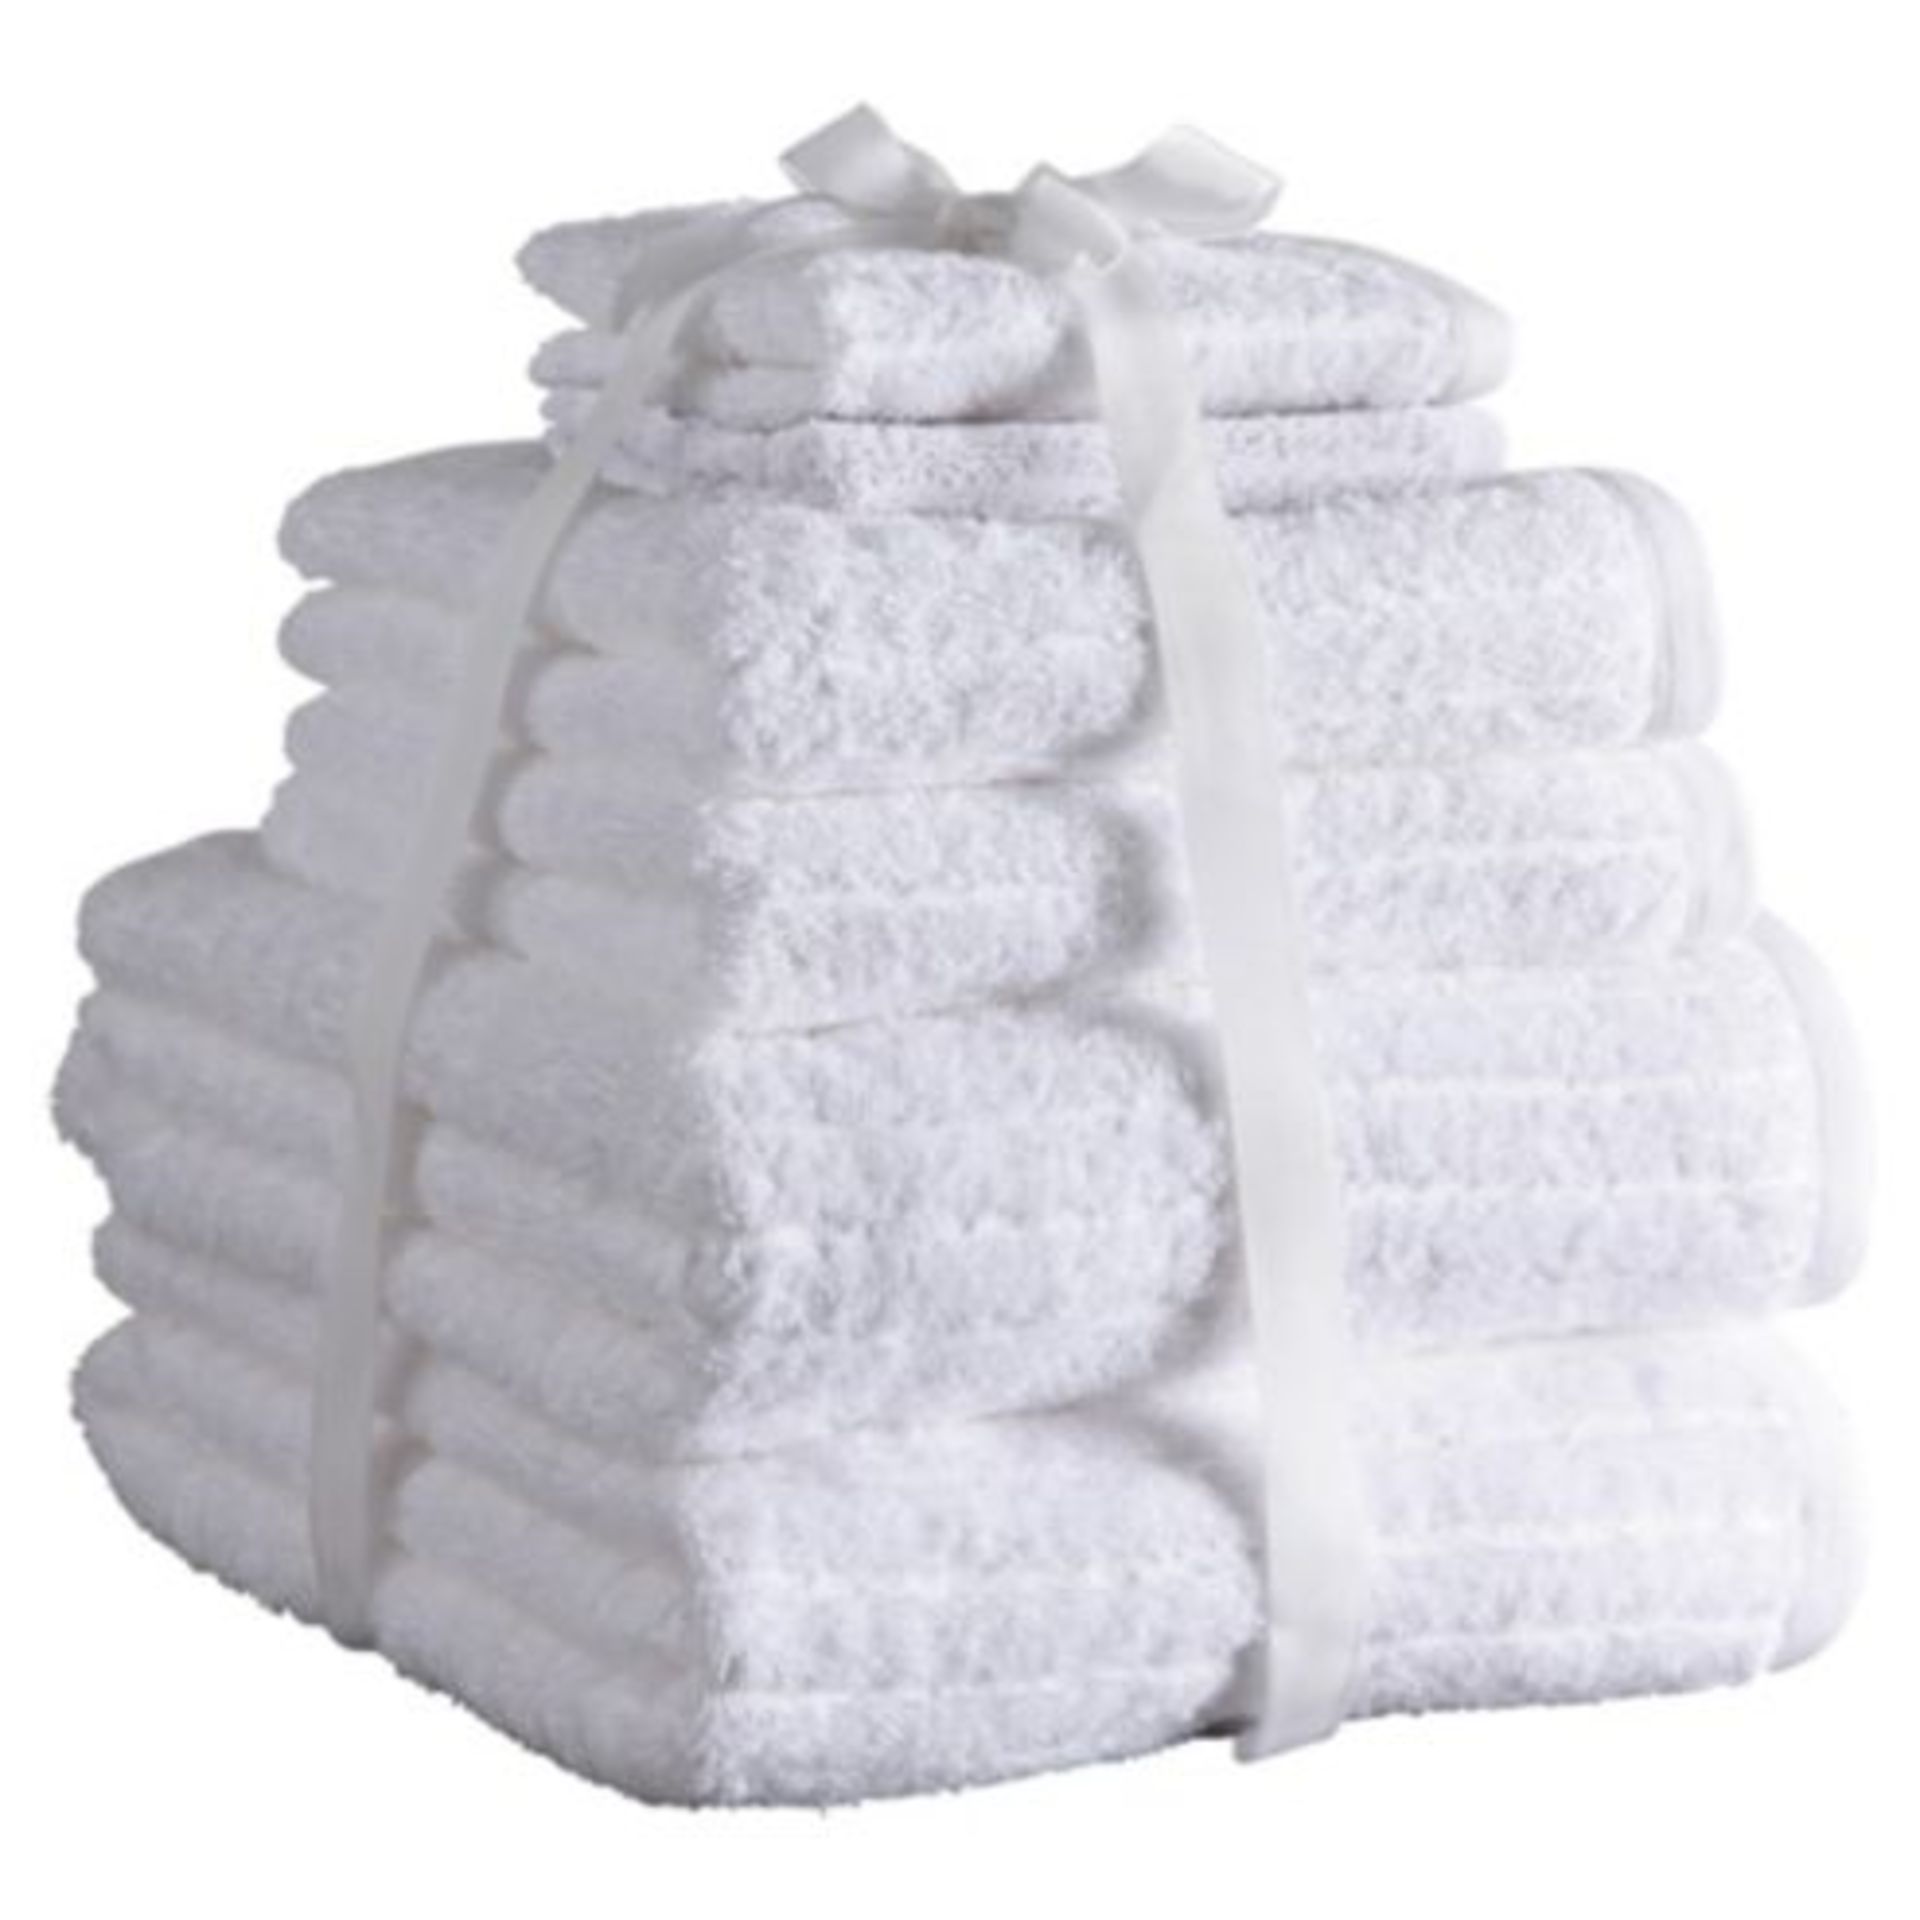 V *TRADE QTY* Brand New Six Piece White Towel Bale Set including 2 Bath Towels 2 Hand Towels and Two